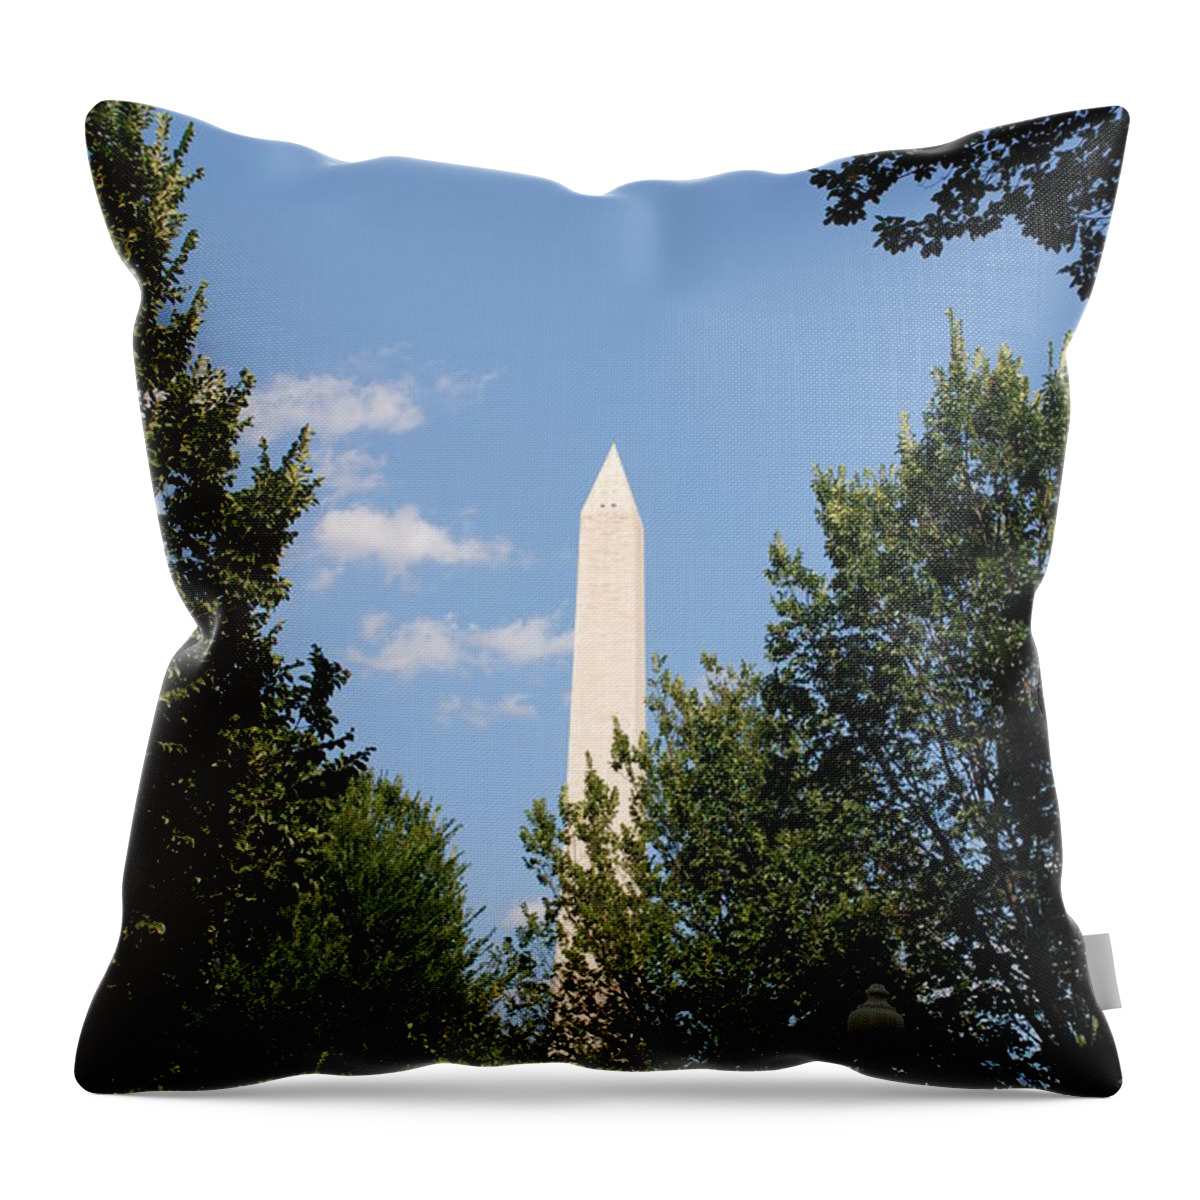 Washington Throw Pillow featuring the photograph Washington Monument by Kenny Glover